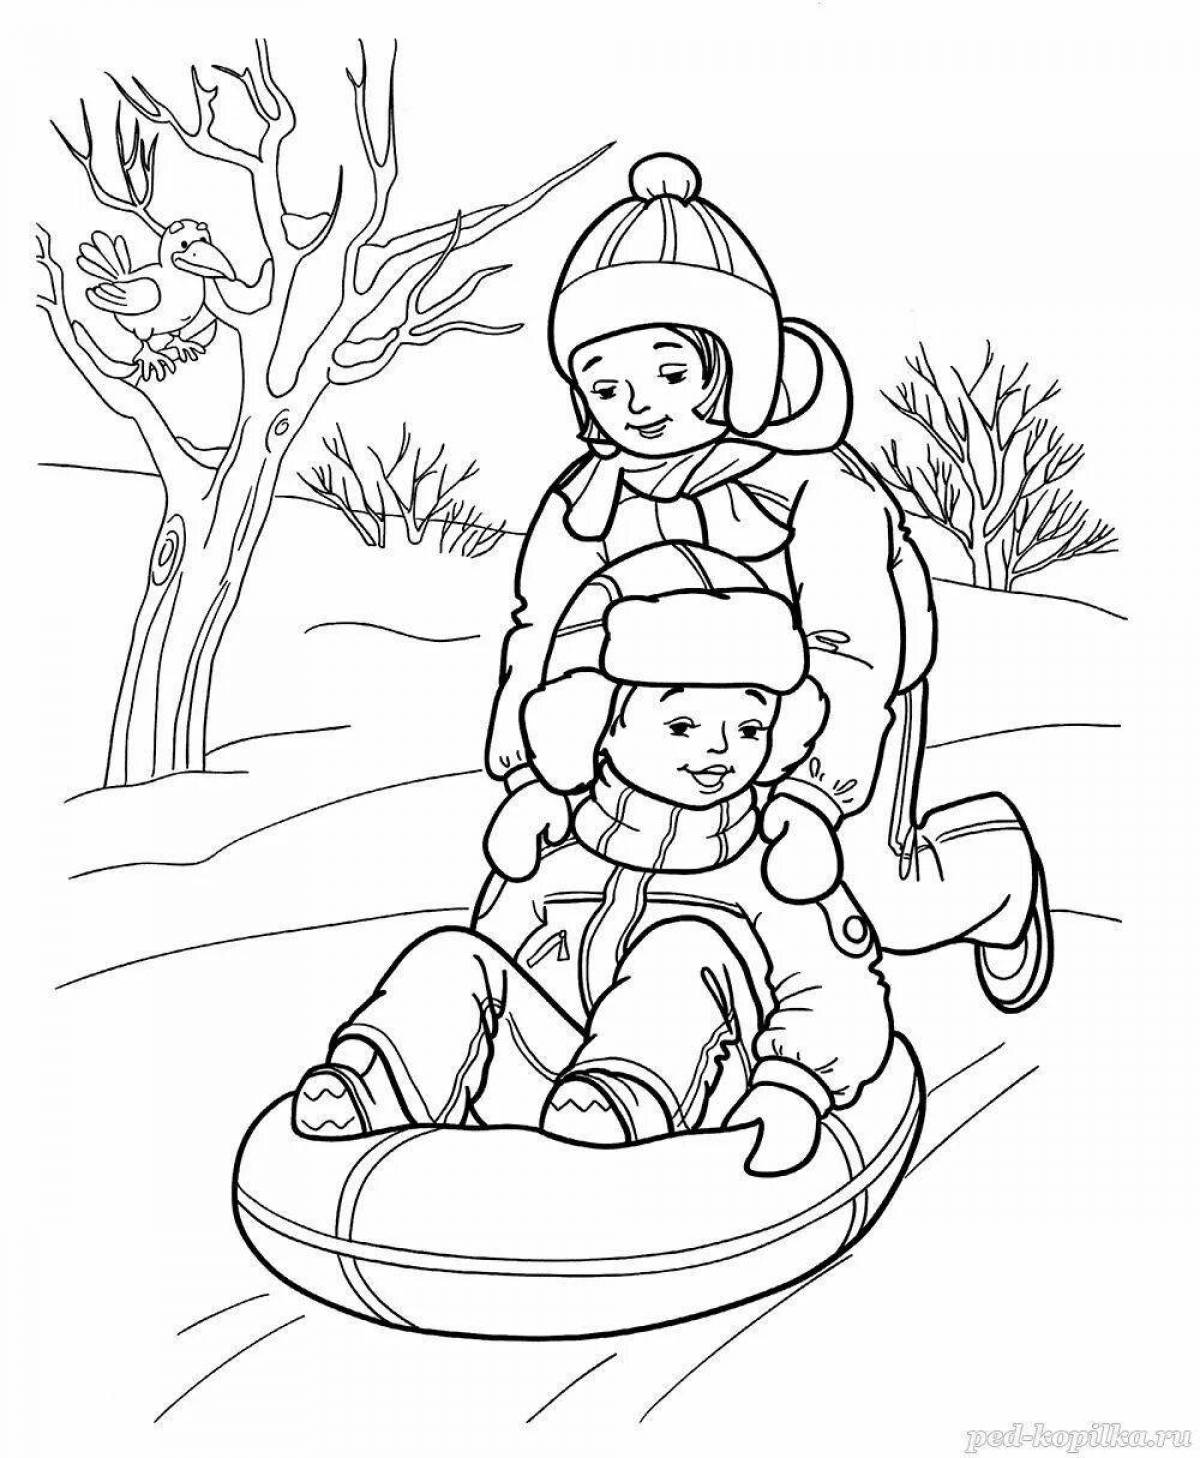 Coloring book glowing children's sled